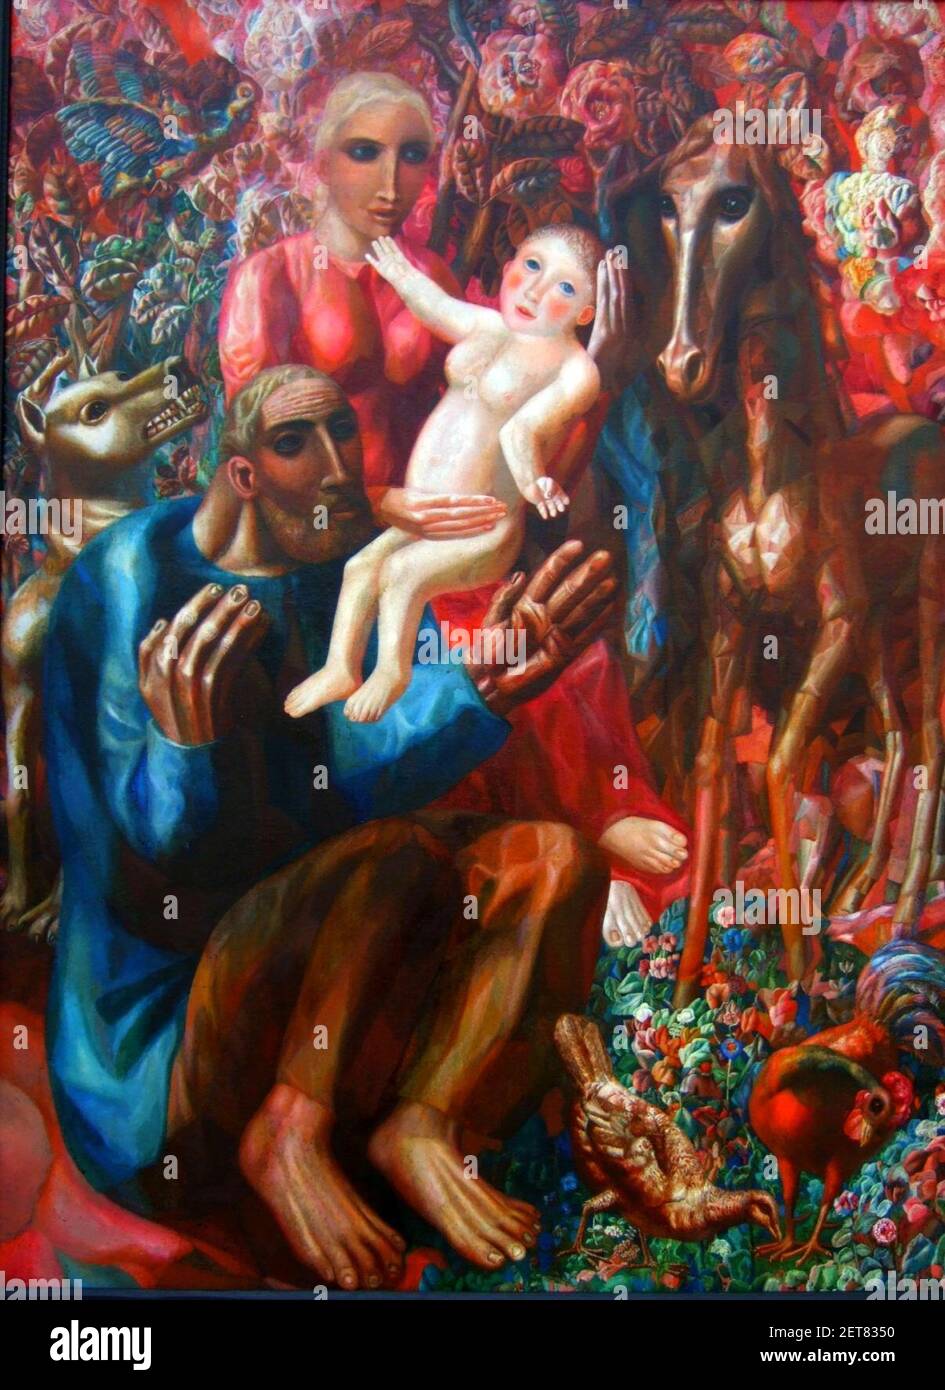 Pavel Filonov famille holyFamily. Banque D'Images